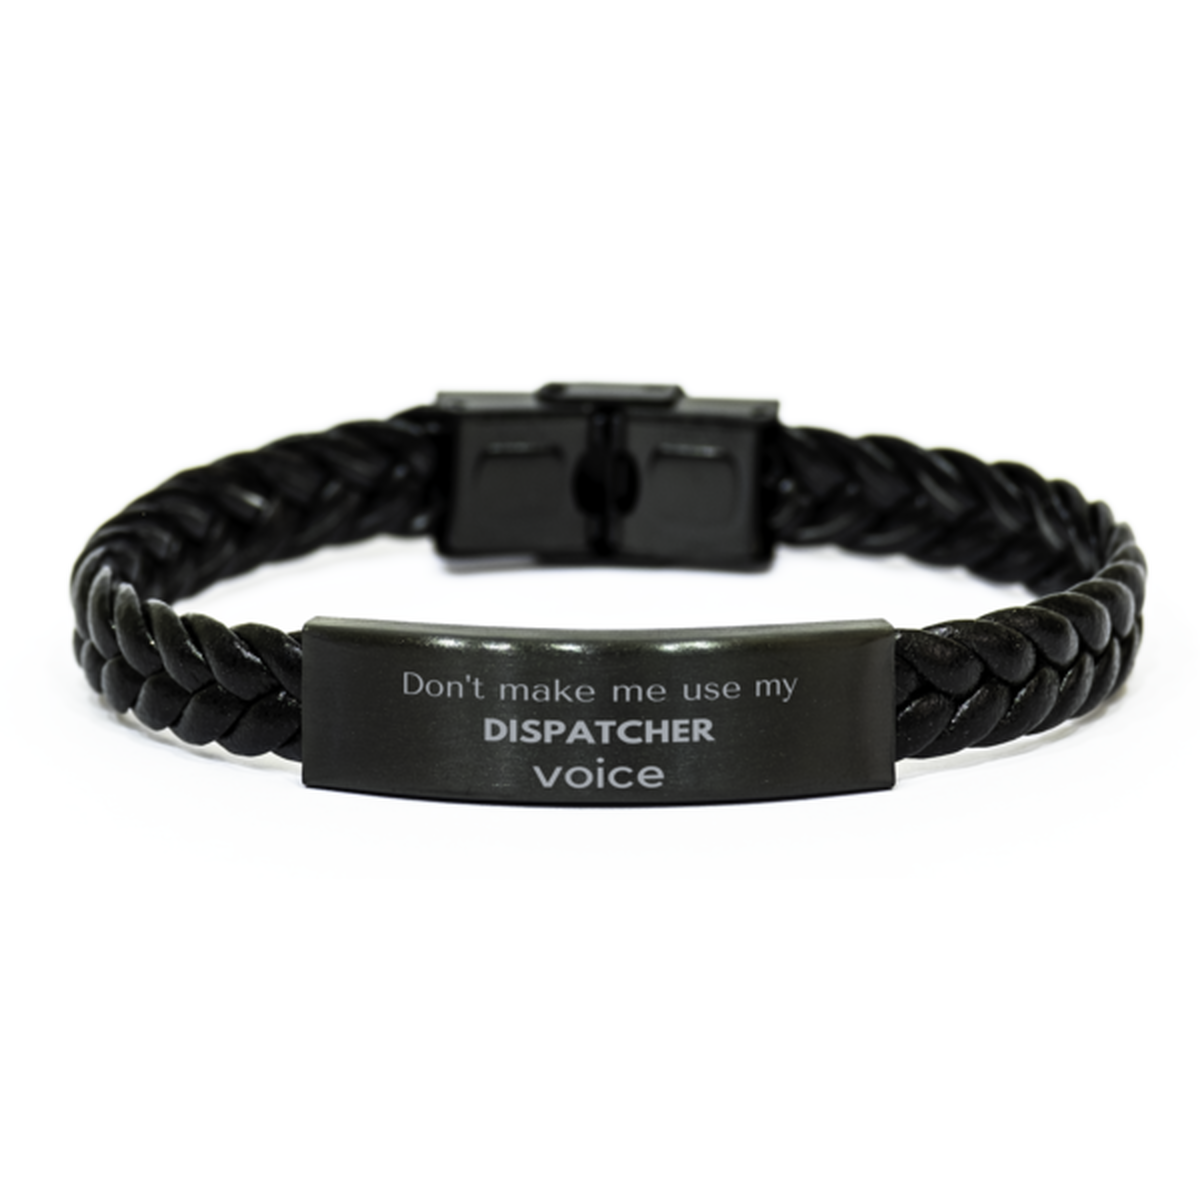 Don't make me use my Dispatcher voice, Sarcasm Dispatcher Gifts, Christmas Dispatcher Braided Leather Bracelet Birthday Unique Gifts For Dispatcher Coworkers, Men, Women, Colleague, Friends